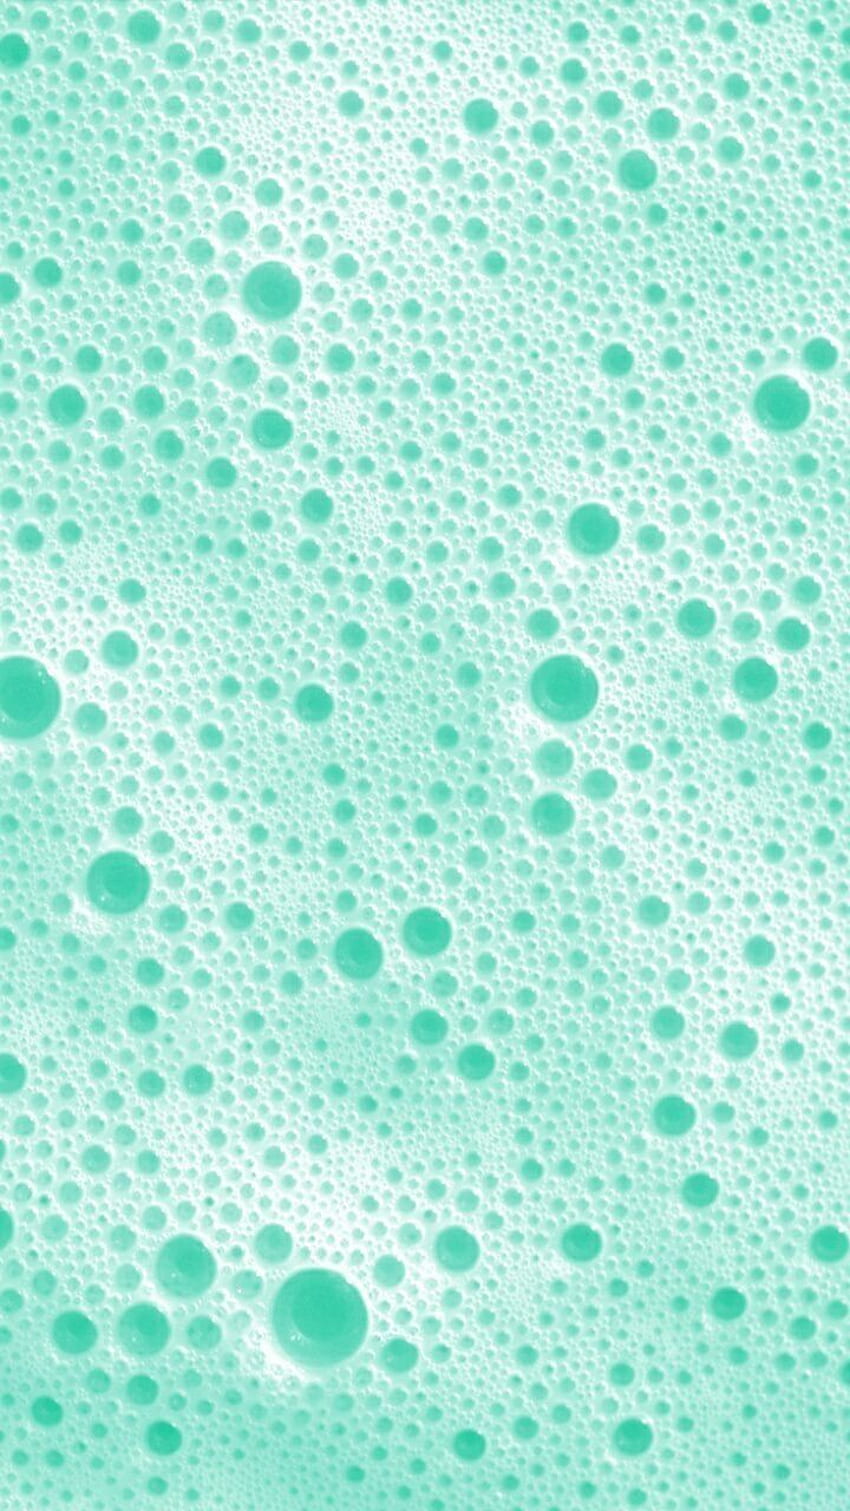 A close up of bubbles in water - Turquoise, light green, aqua, mint green, bubbles, green